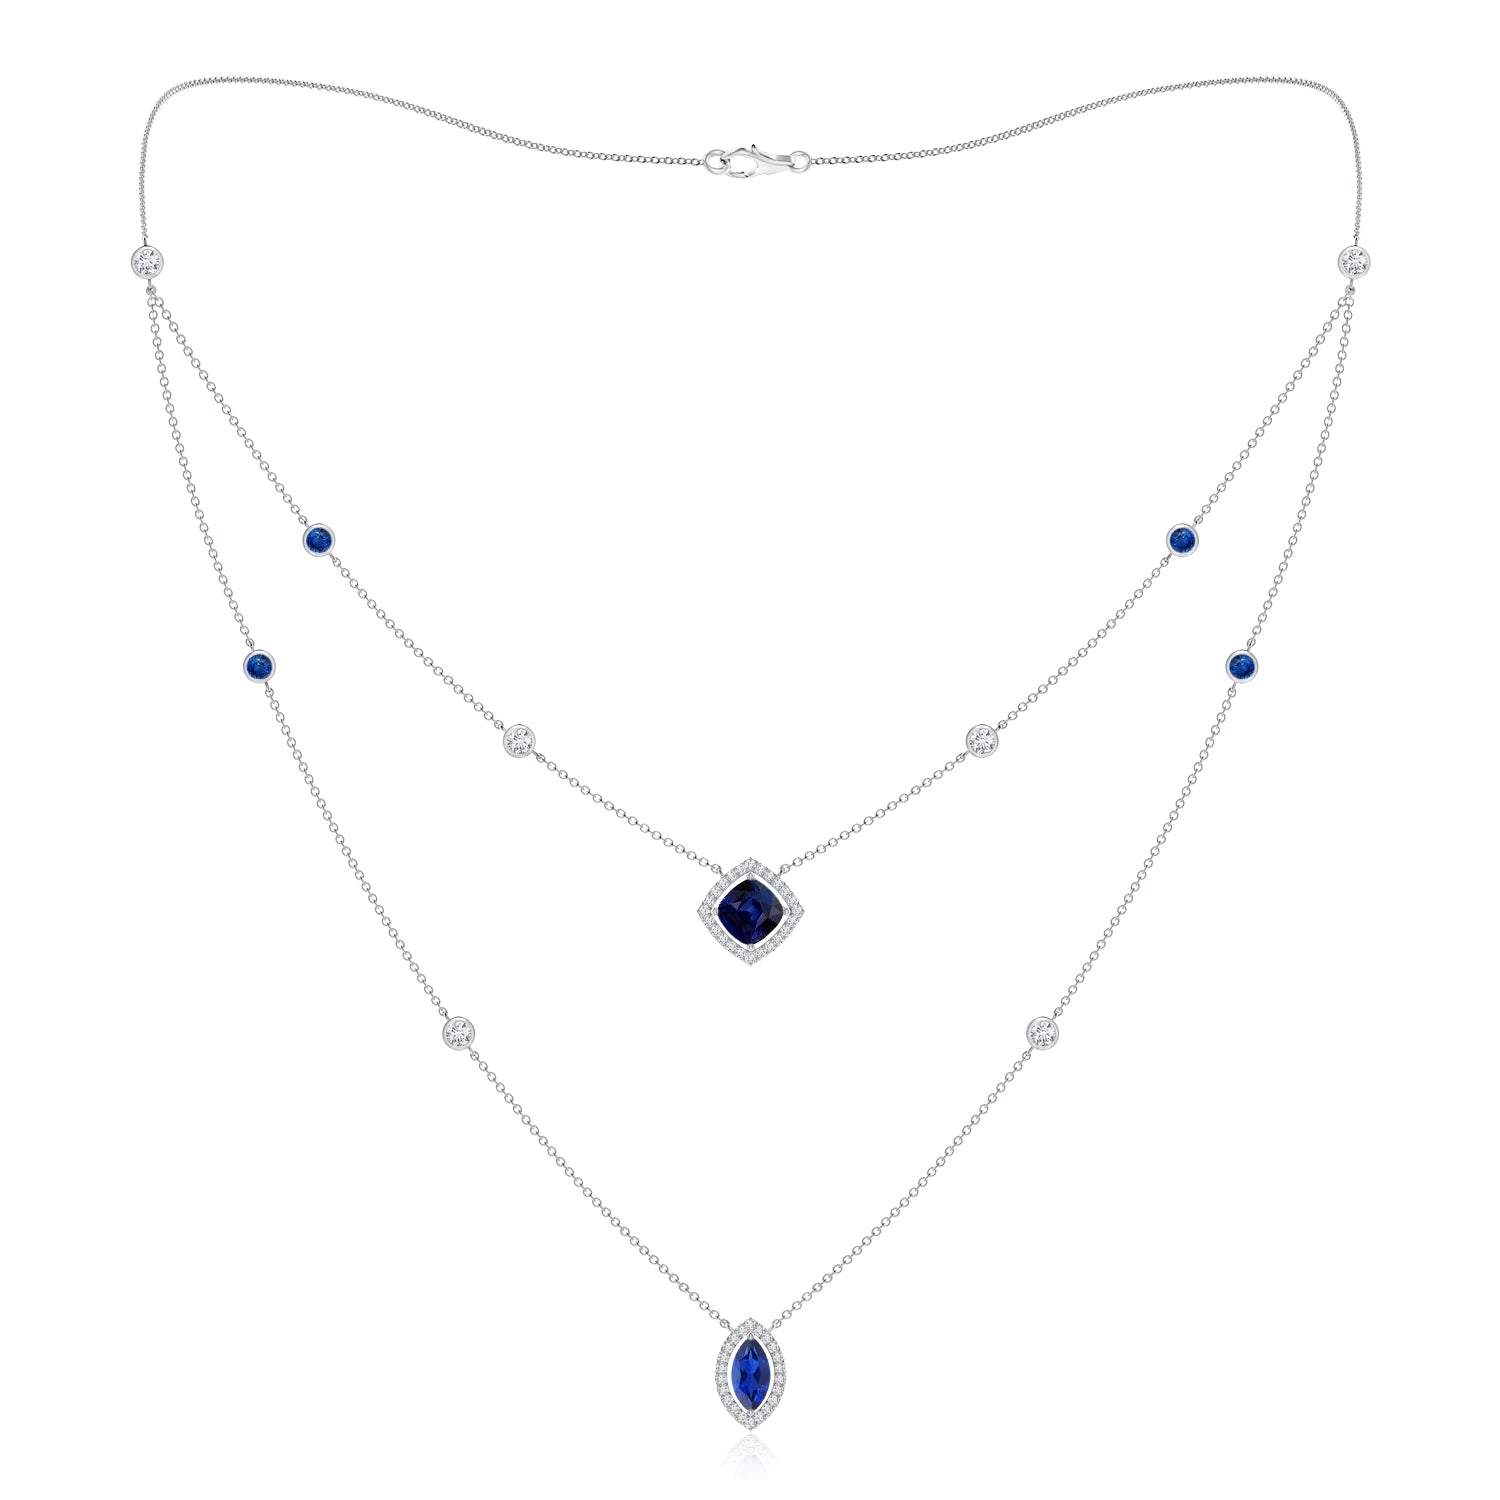 2.6 CT. Cushion & Marquise Cut Sapphire Halo Layered Necklace